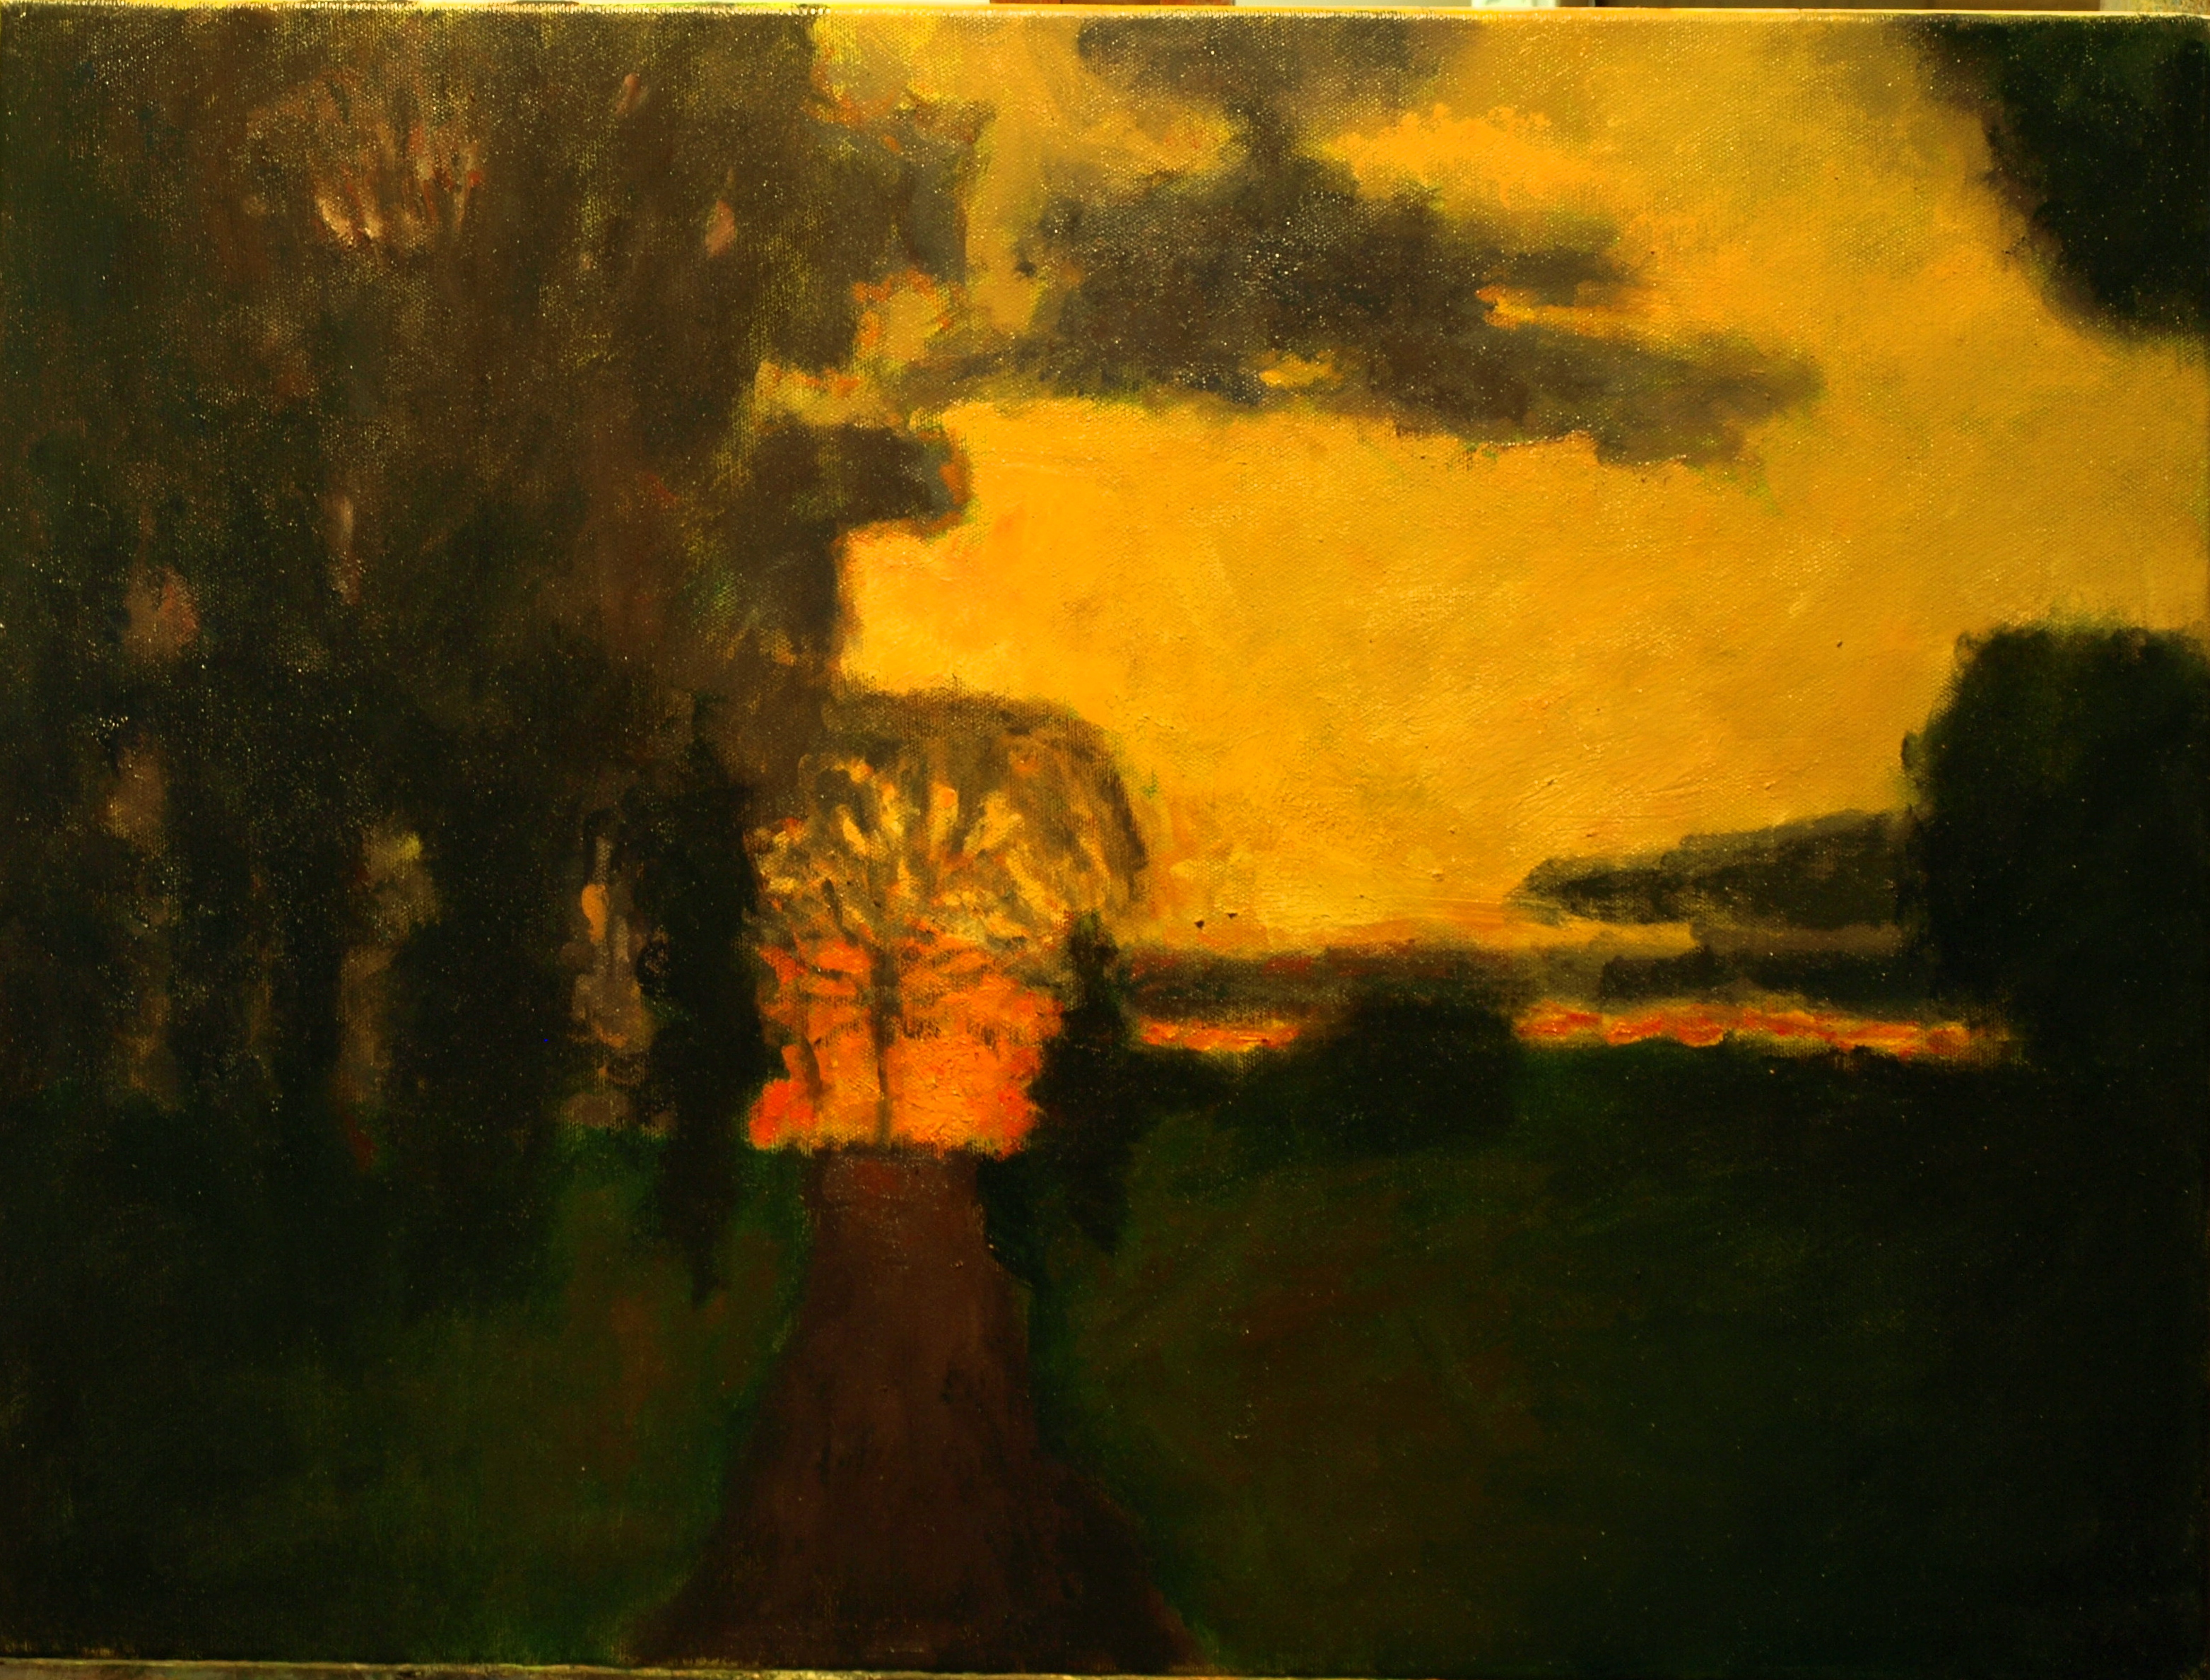 Road to the Sunset, Oil on Canvas, 18 x 24 Inches, by Richard Stalter, $650